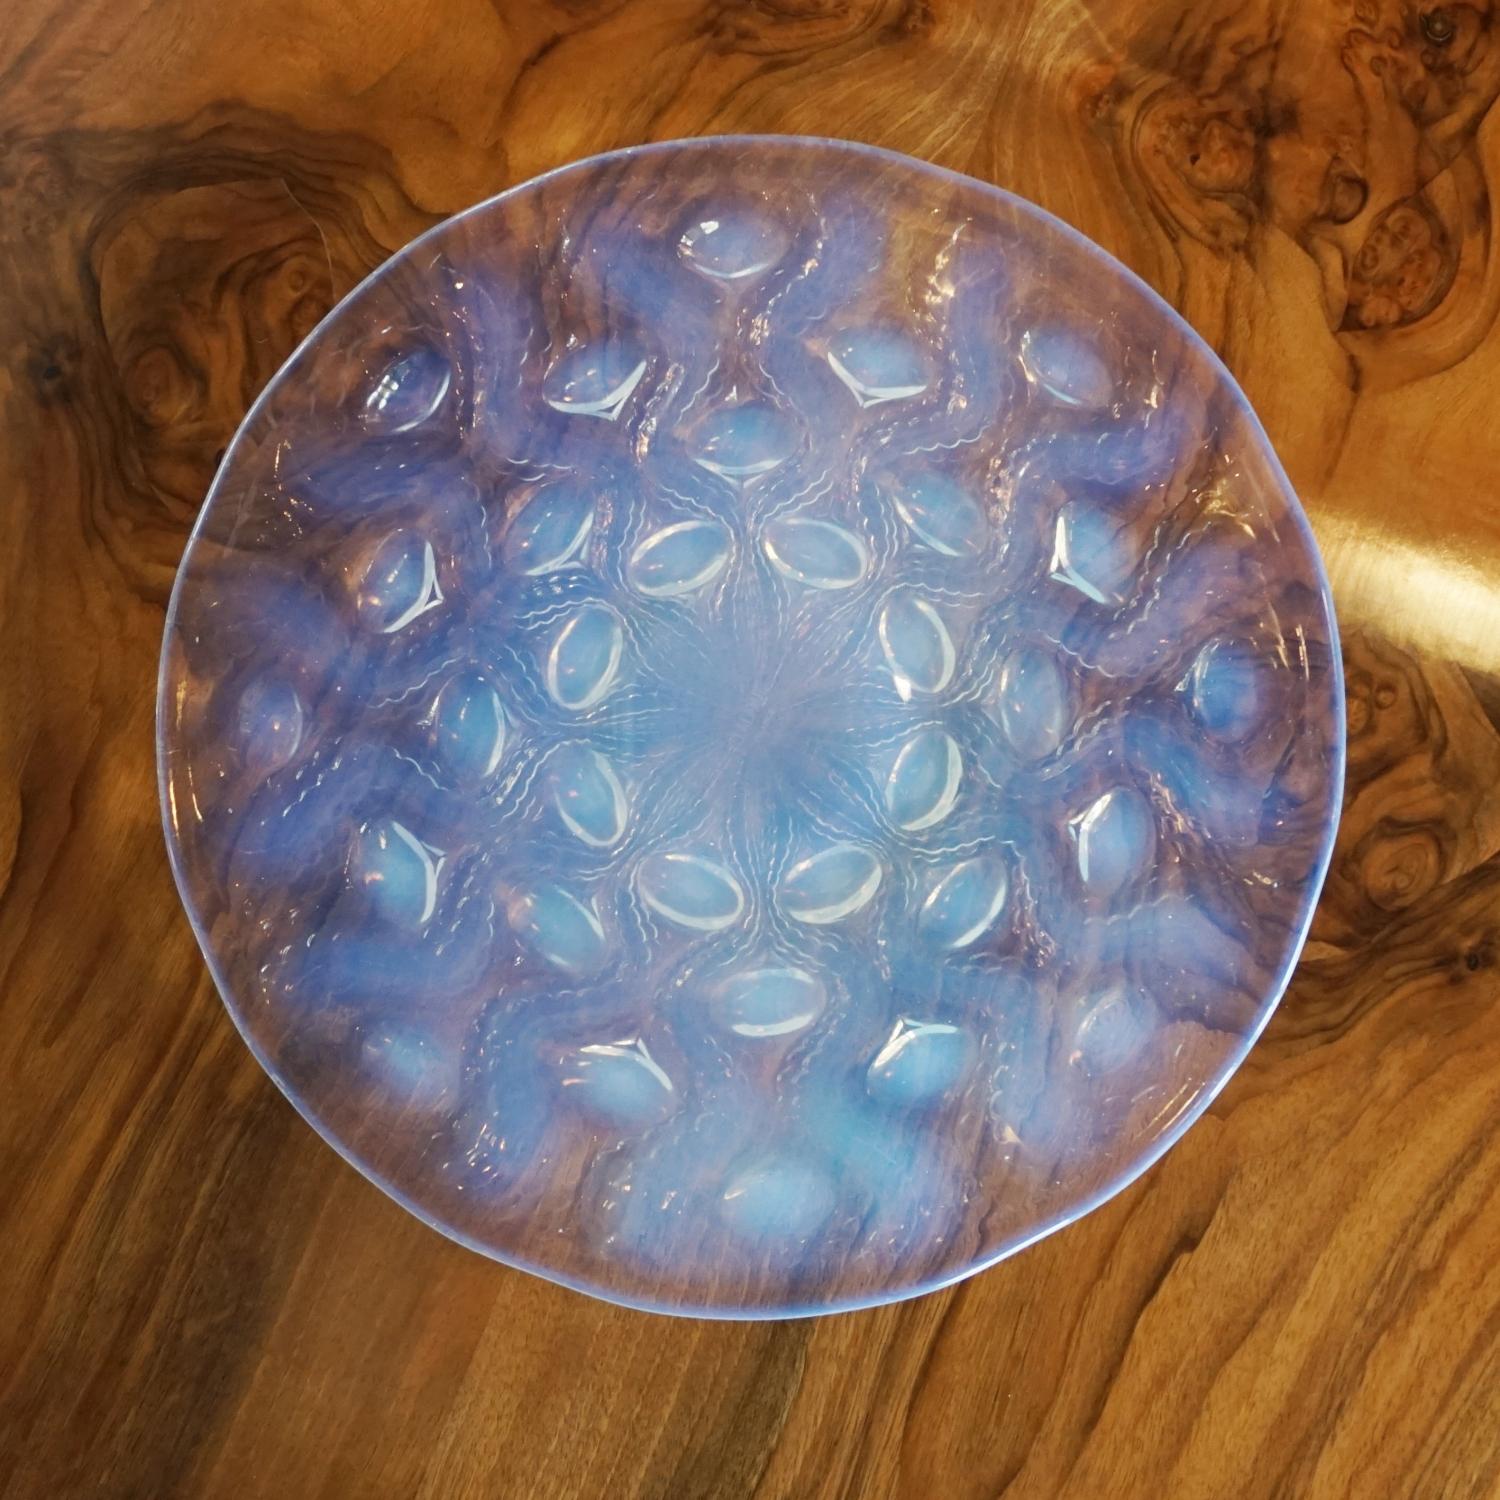 Bulbes, an Art Deco opalescent and frosted glass plate by René Lalique with bubble details. Cloudy blue opalescence. 

Photographed on contrasting backgrounds to accurately represent intricate opalescence. 

Literature: Marcilhac, R Lalique